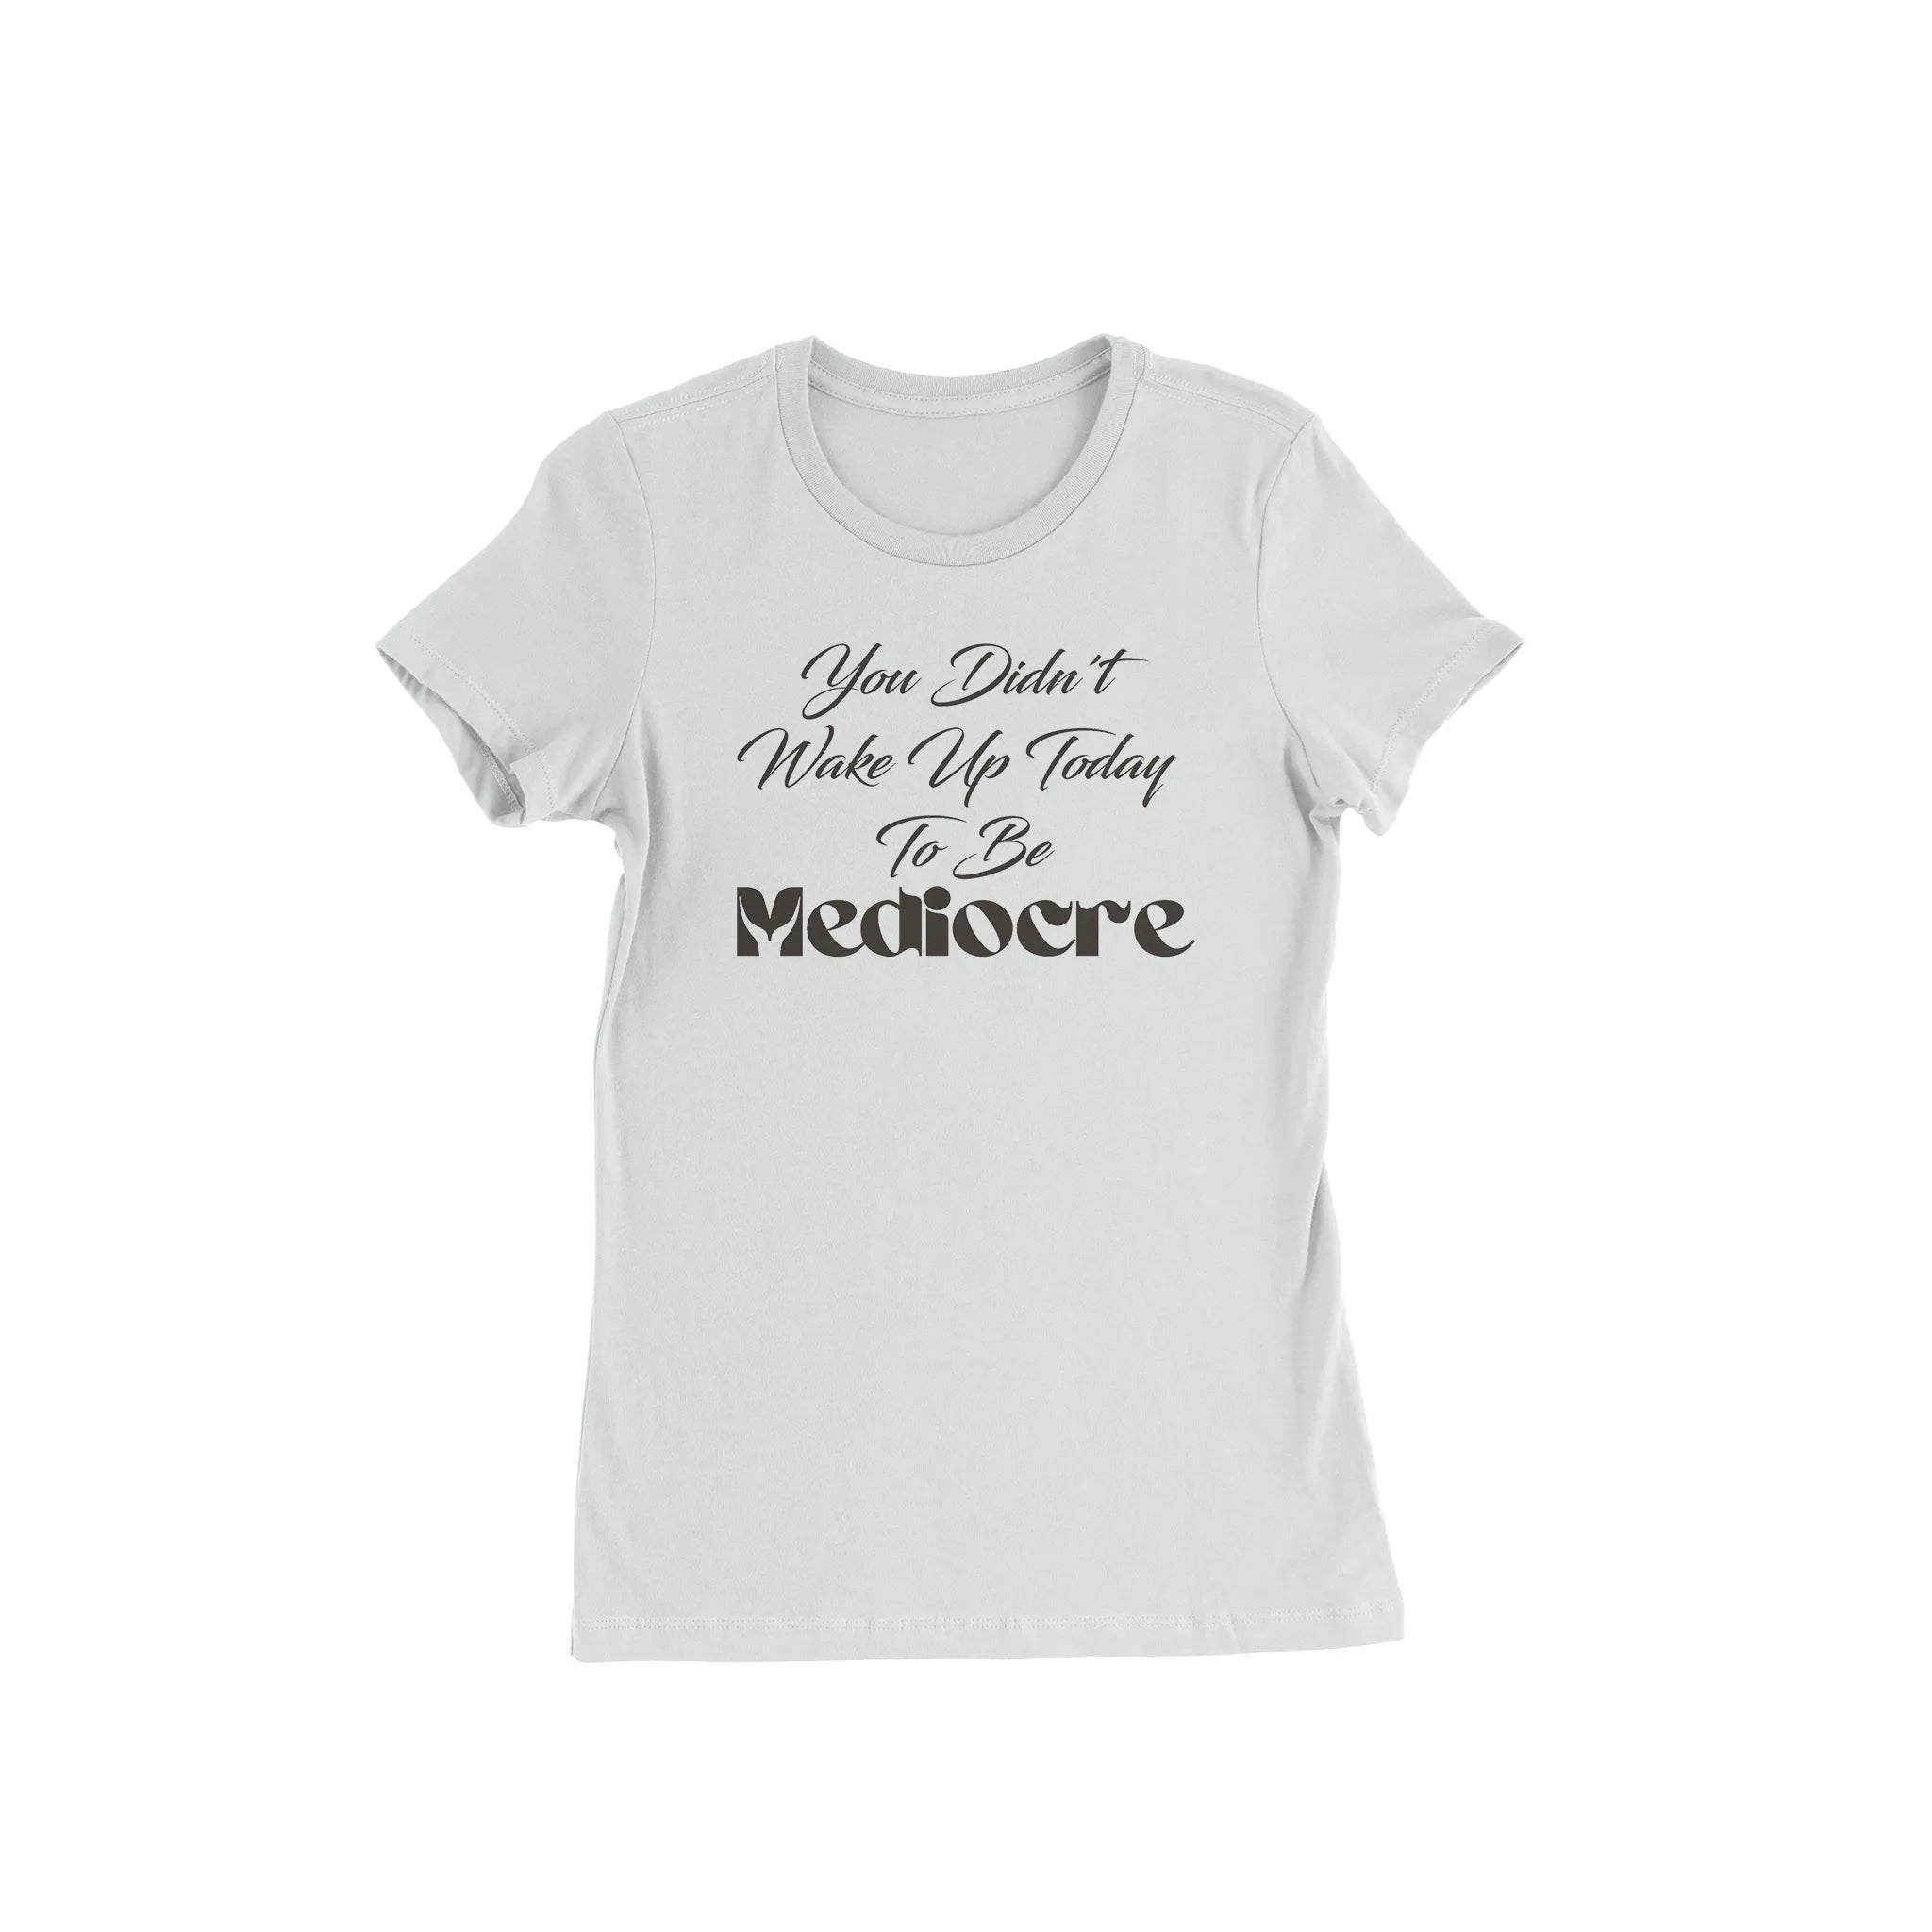 You Didn't Wake Up to be Mediocre White T - Shirt - Diva Starr Boutique